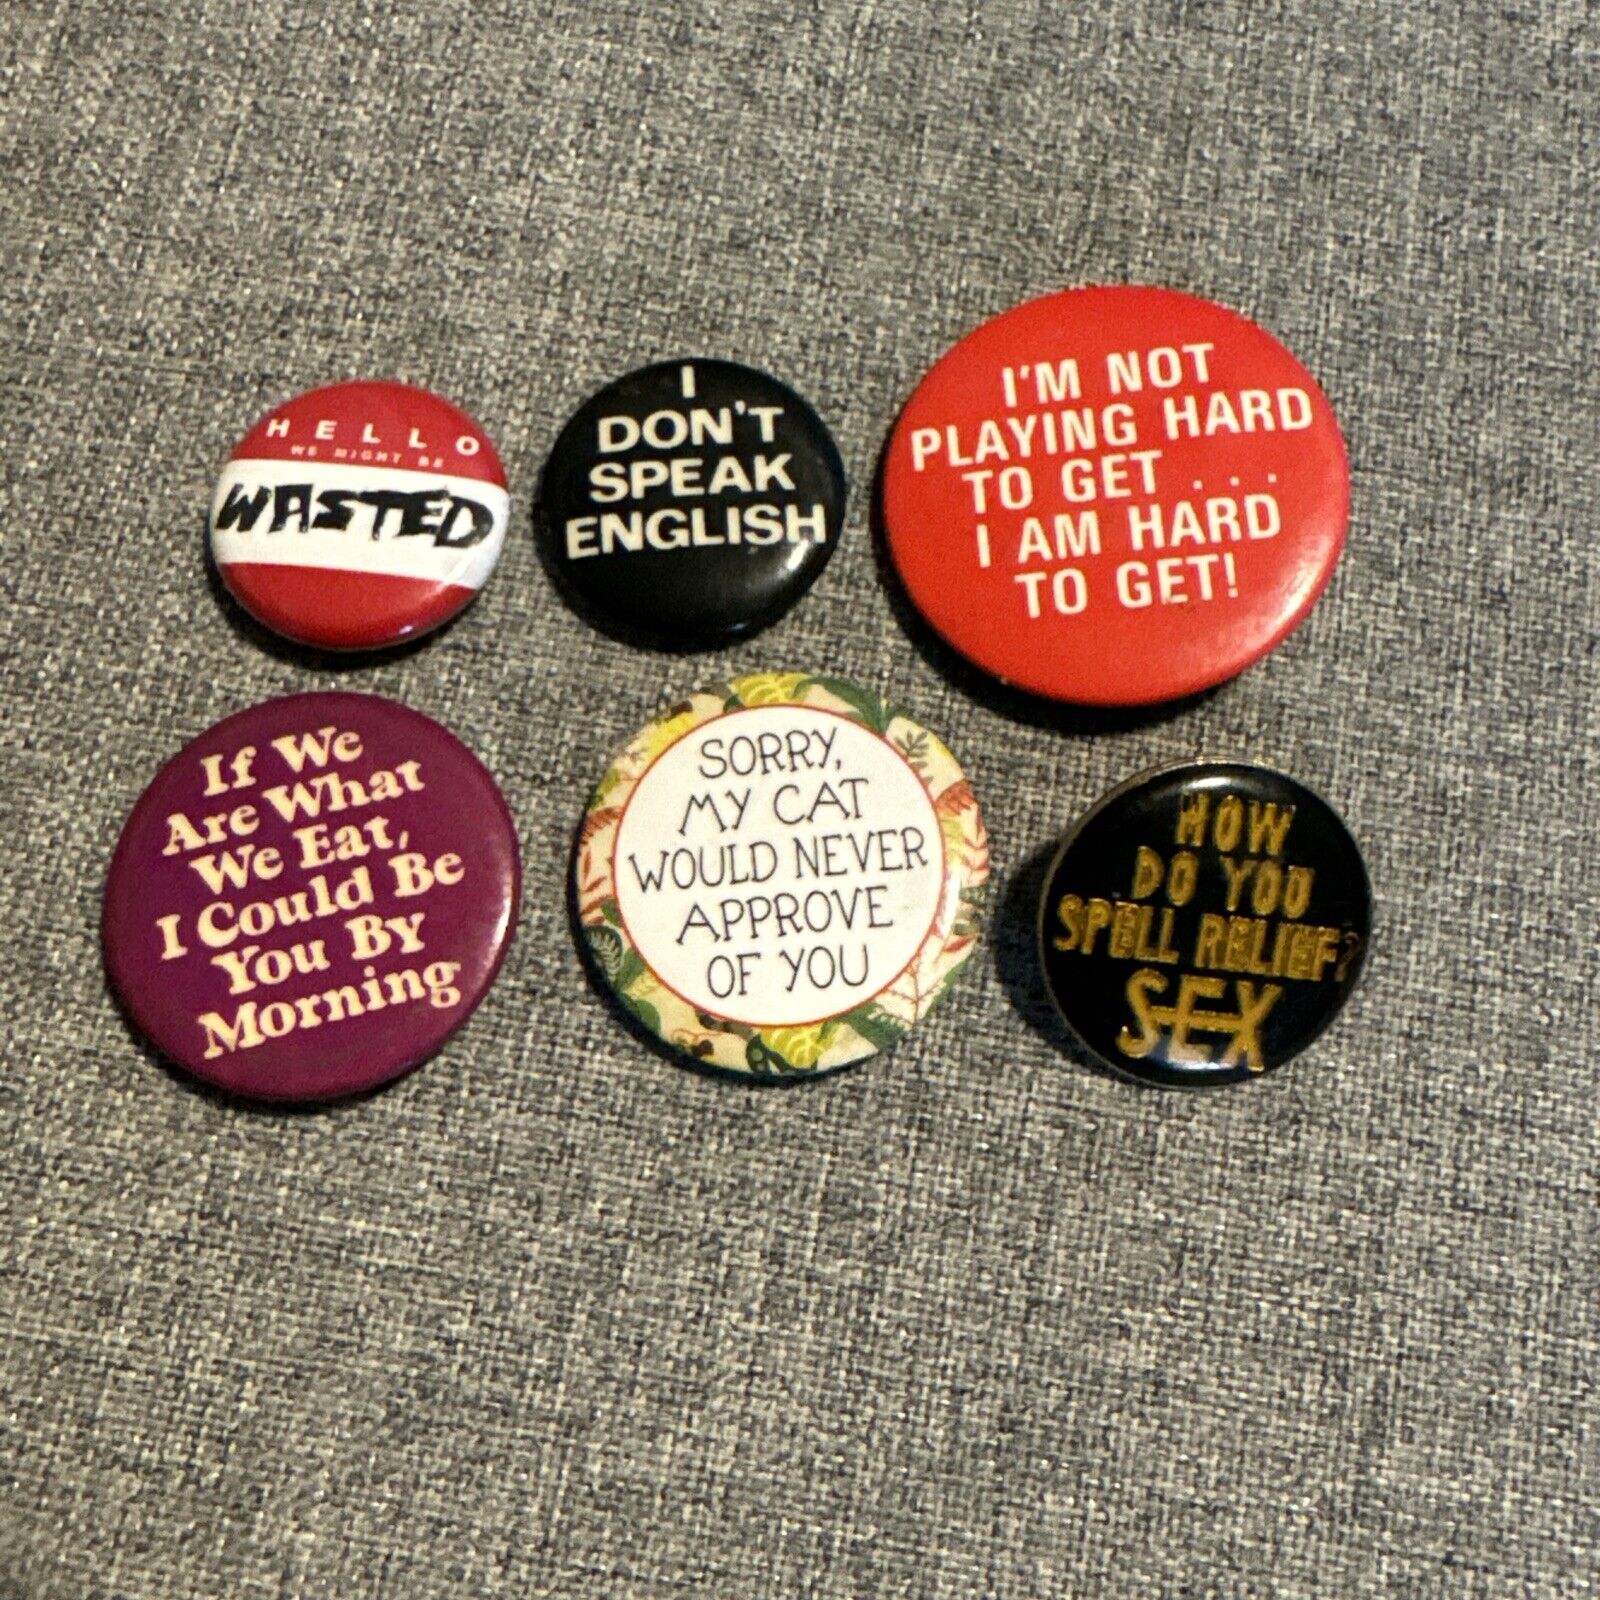 6 Vintage Pinback Buttons - 1980s 90s Funny / Humor Jean Jacket Pins